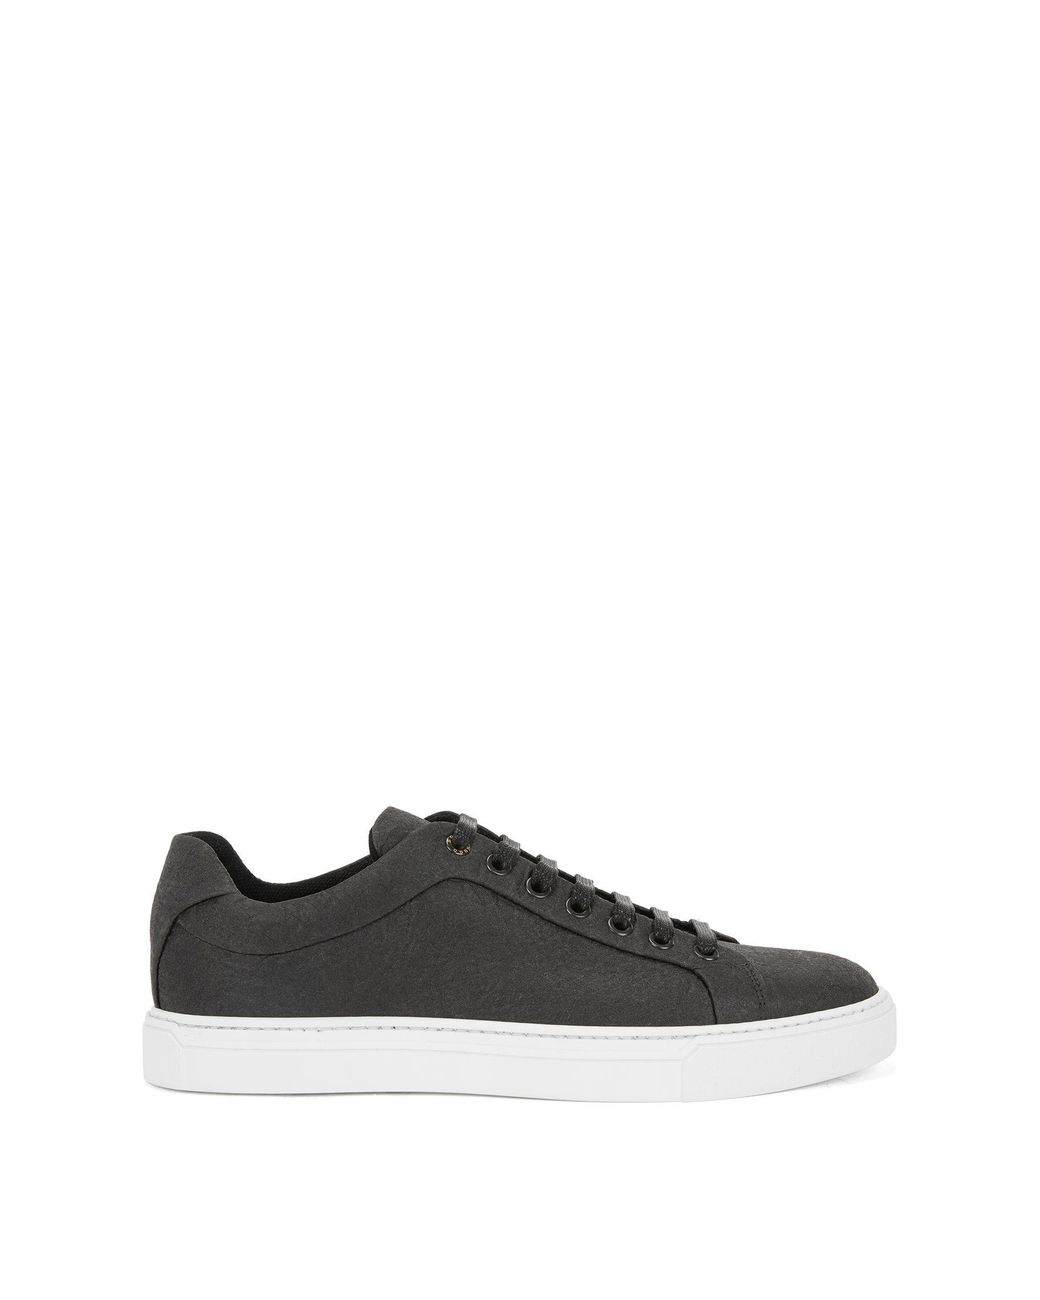 BOSS by Hugo Boss Cotton Limited-edition 100% Vegan Trainers In Piñatex ...